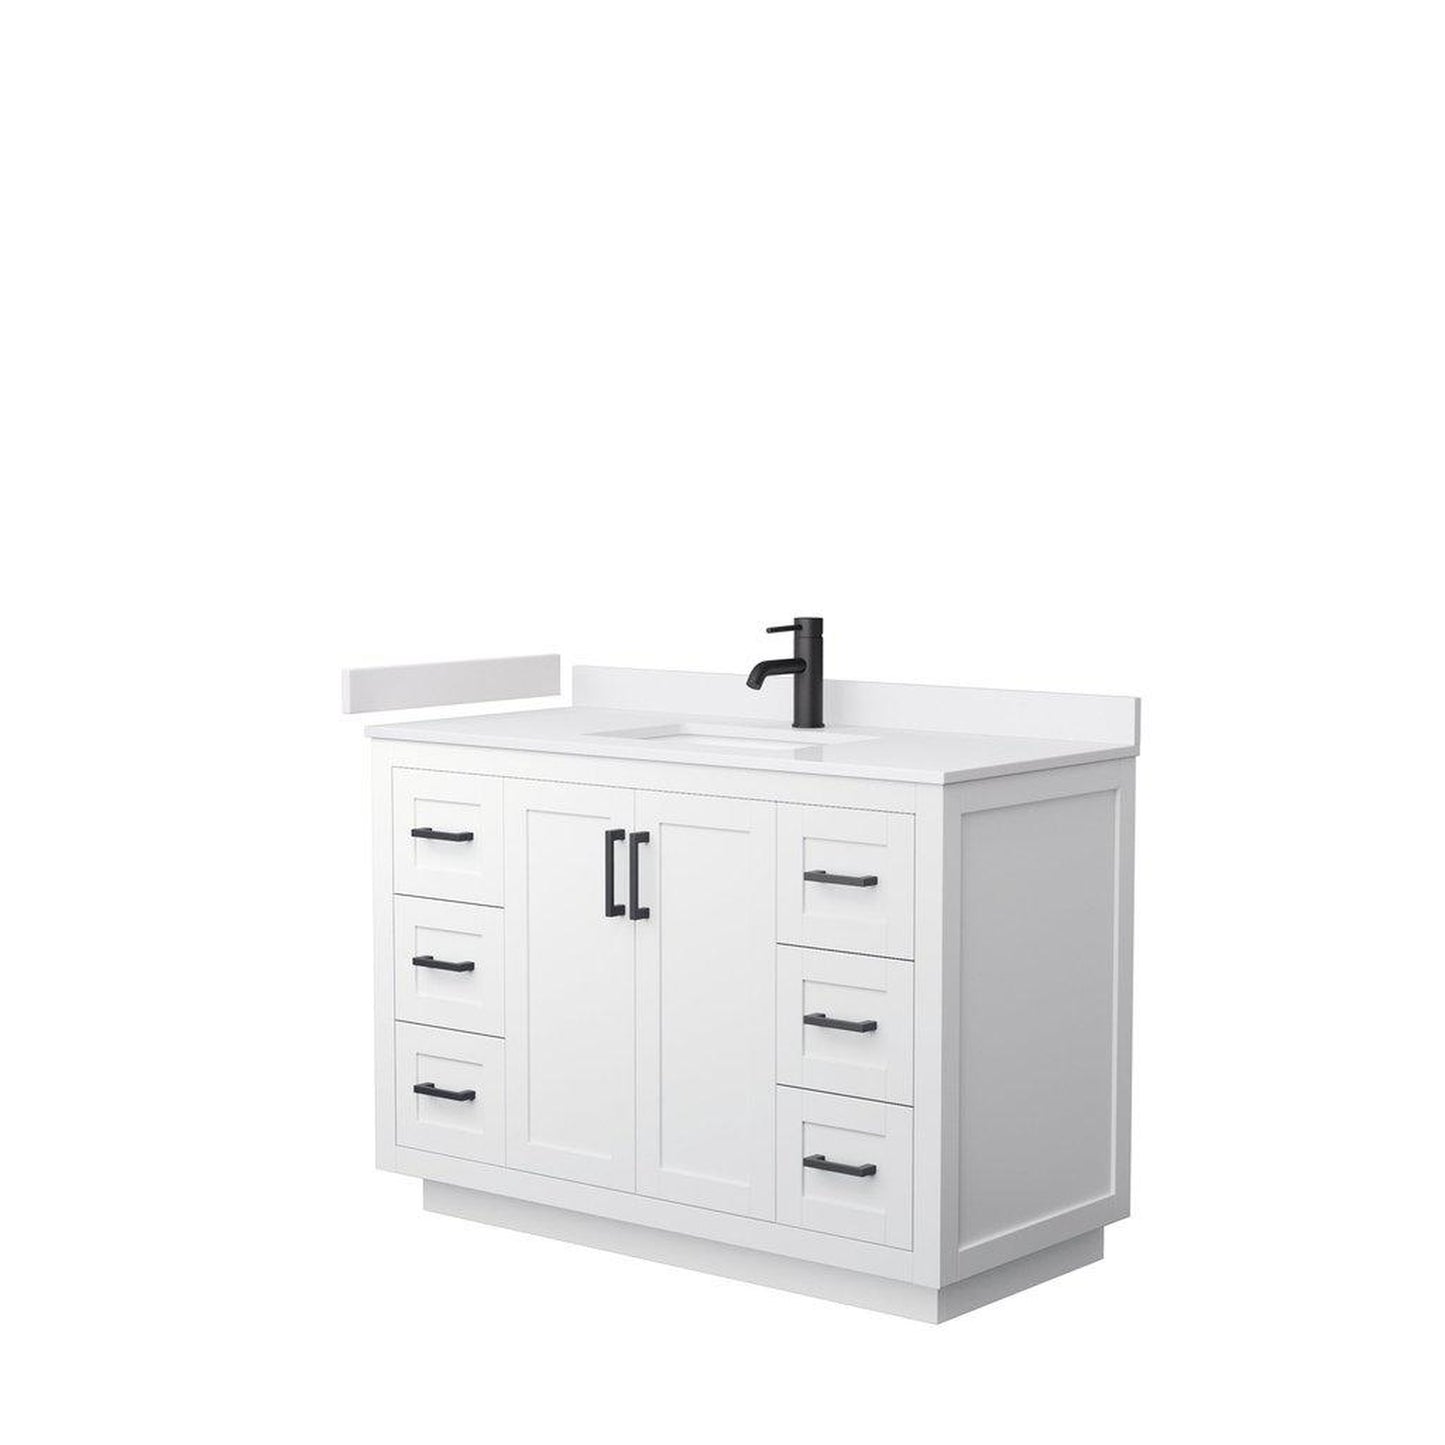 Wyndham Collection Miranda 48" Single Bathroom White Vanity Set With White Cultured Marble Countertop, Undermount Square Sink, And Matte Black Trim